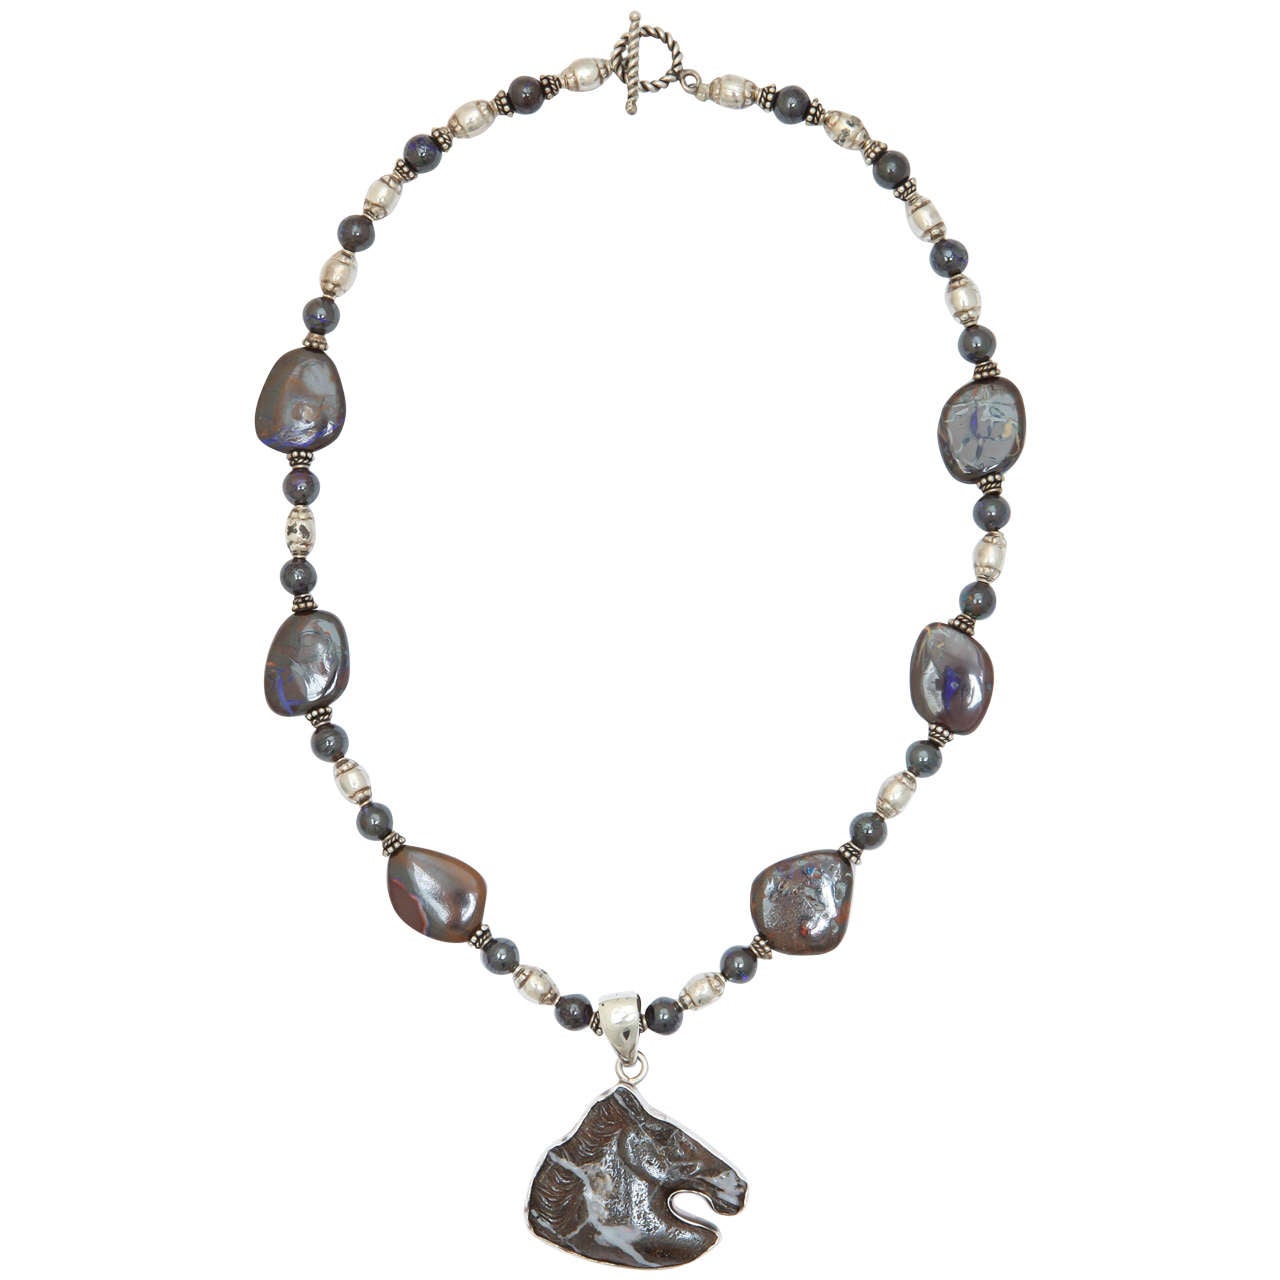 One of a kind necklace with a carved boulder opal horse head set in a silver bezel .The beads are flat nugget and round boulder opal with  silver beads in between, finished with a sterling toggle clasp. The total length of this powerful necklace is